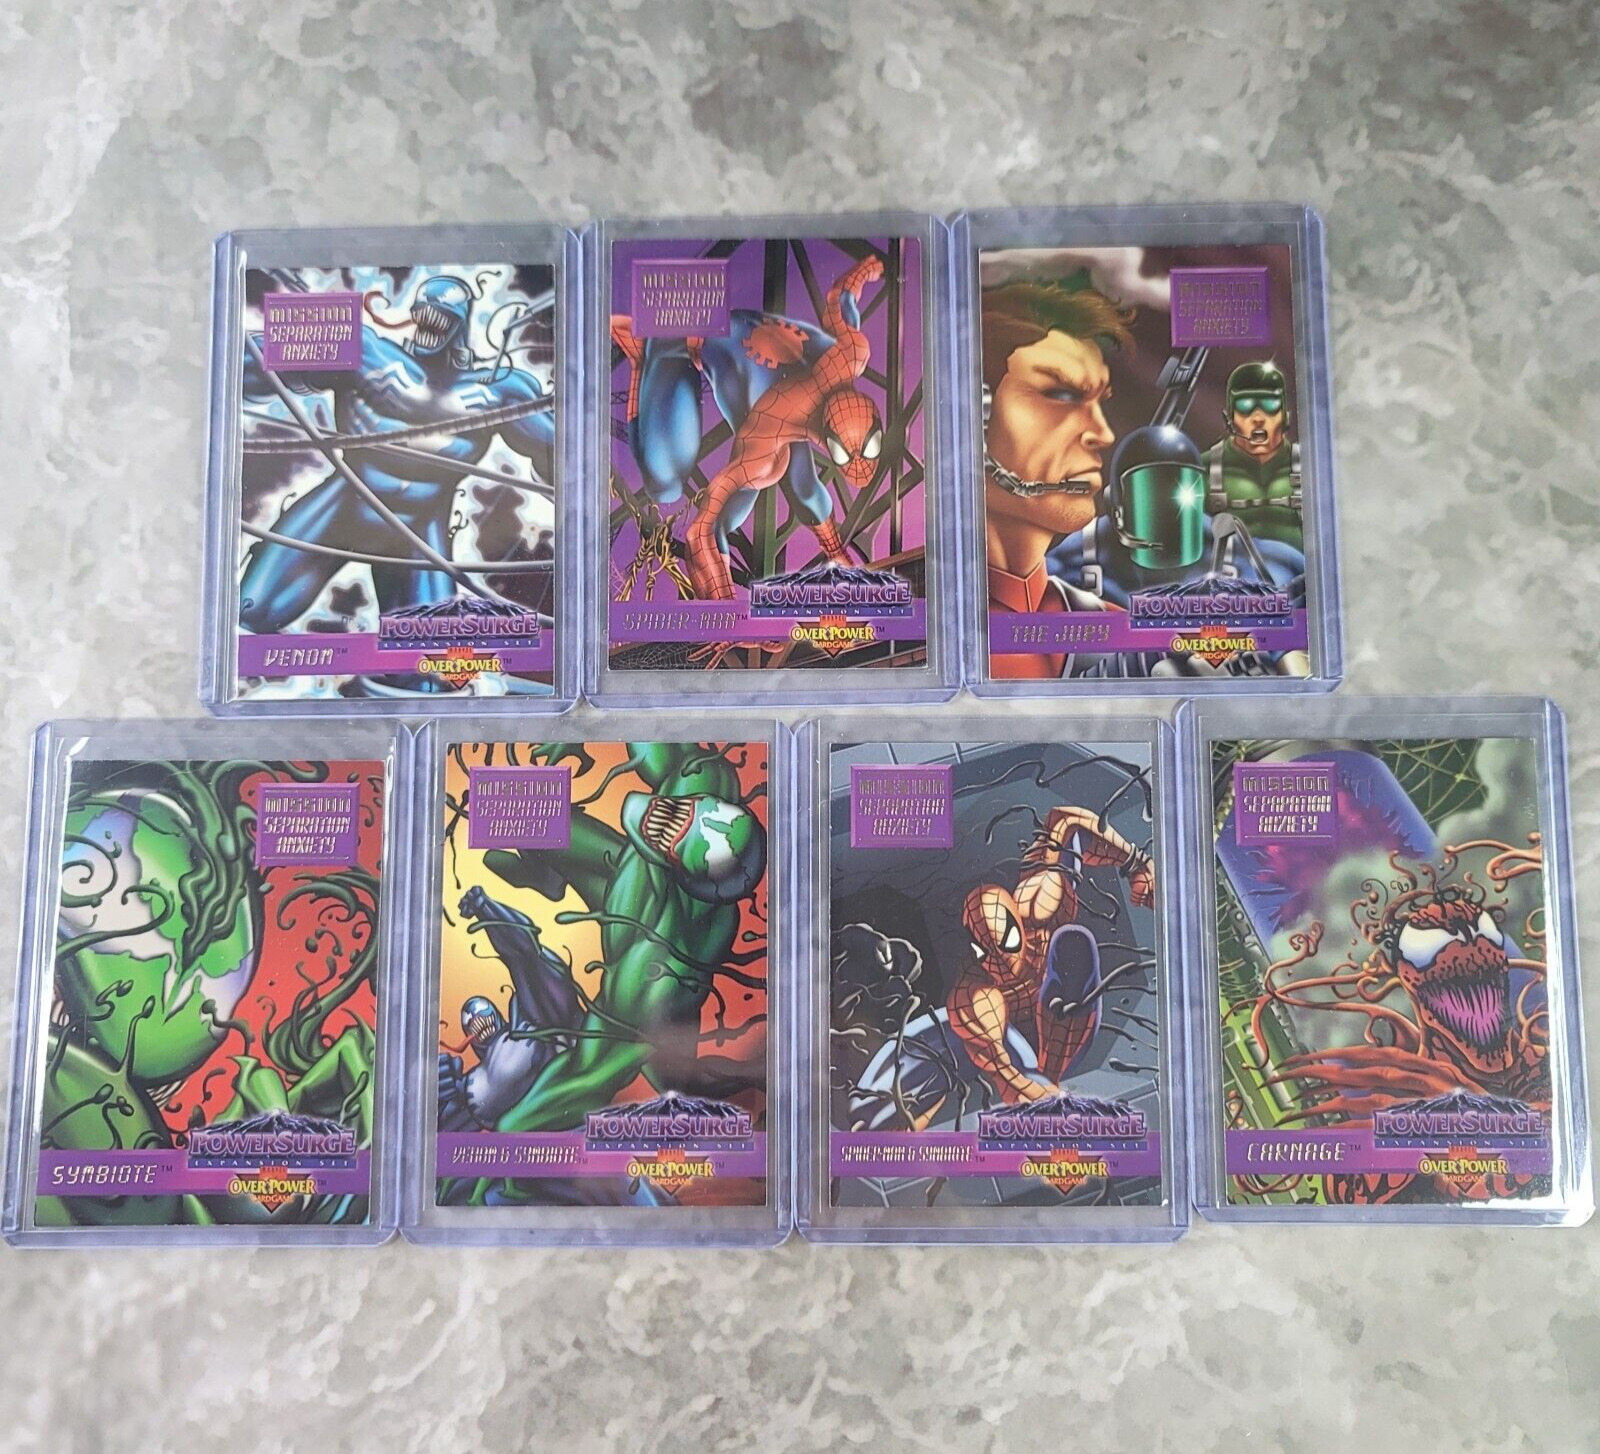 1995 Marvel Overpower Card Game Separation Anxiety Mission Cards Complete Set1-7